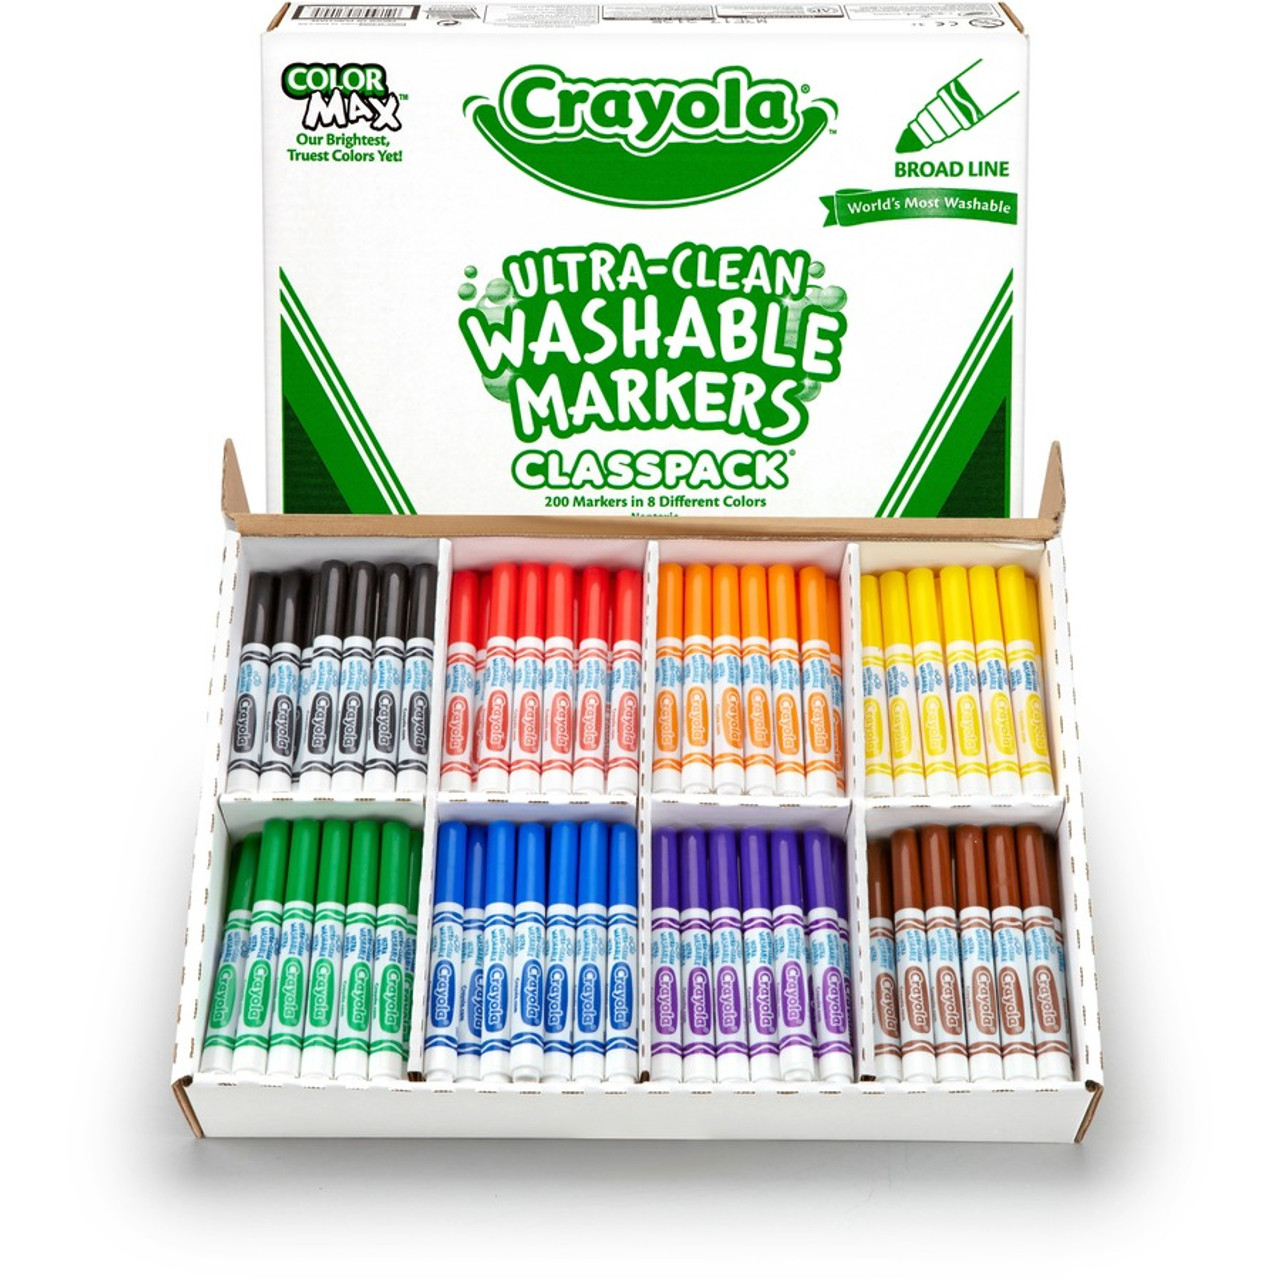 Feutres lavables crayola colours of the world - Crayola